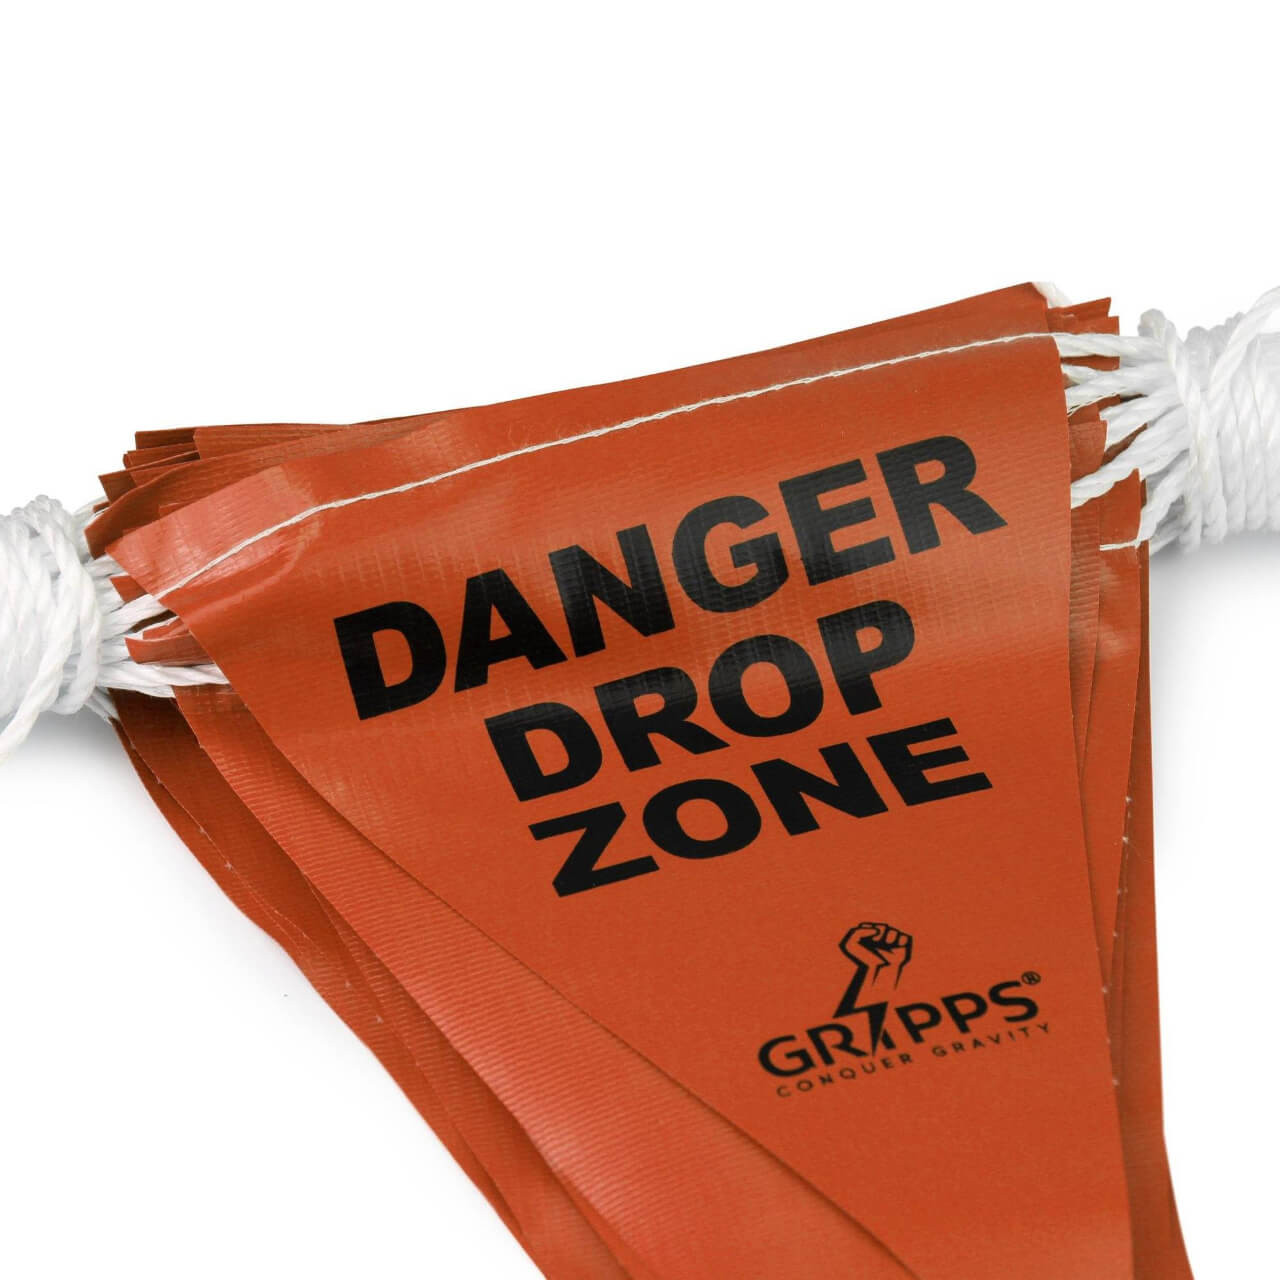 GRIPPS ”DANGER DROP ZONE' Bunting Safety Flags on Rope - Orange 30m Length